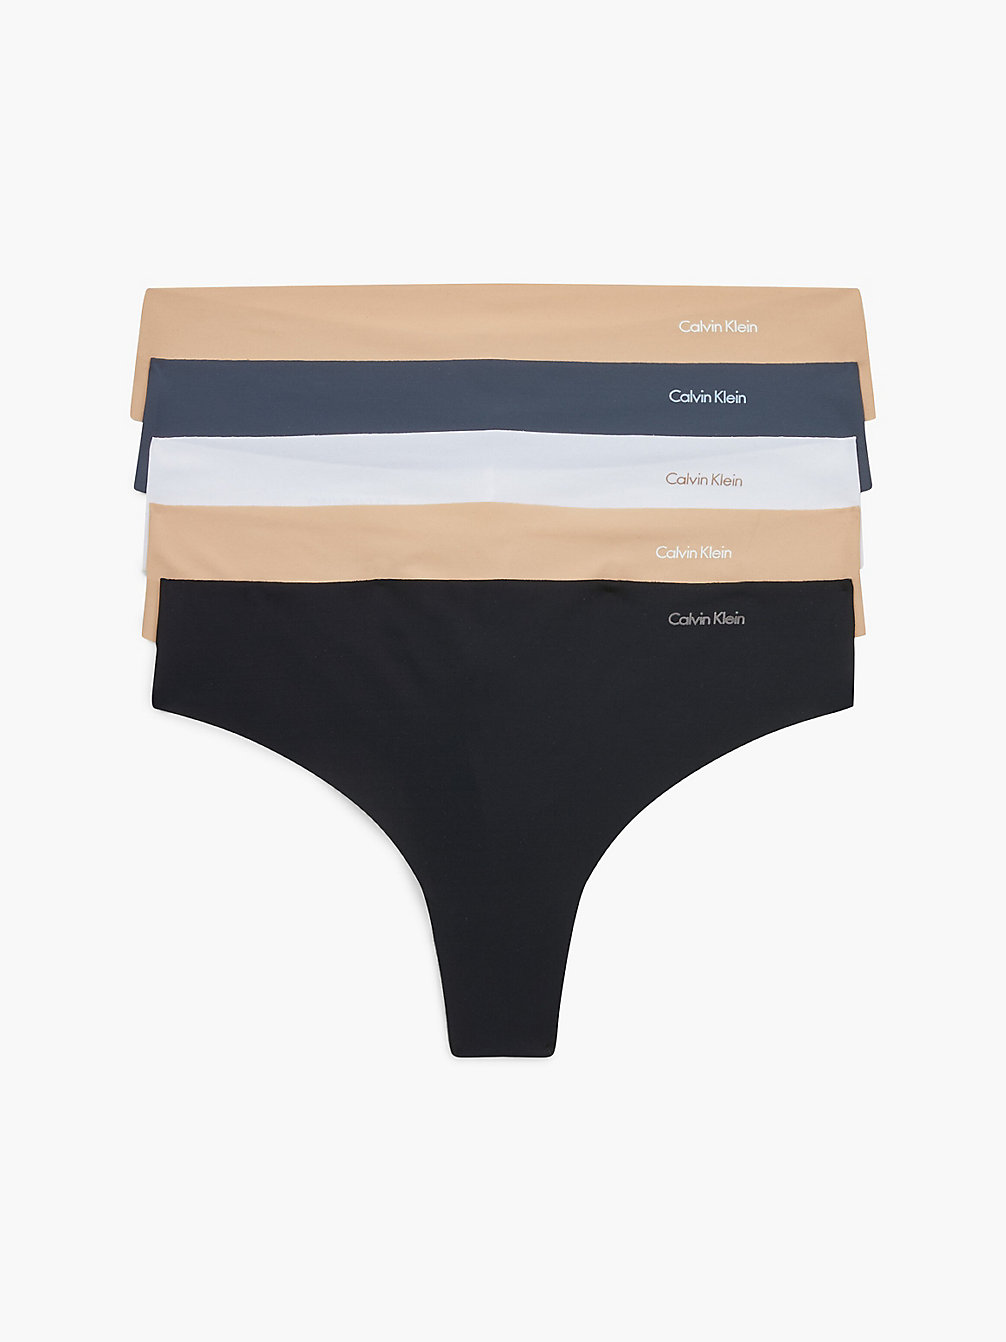 B/S/W/LC/LC 5 Pack Thongs - Invisibles undefined women Calvin Klein